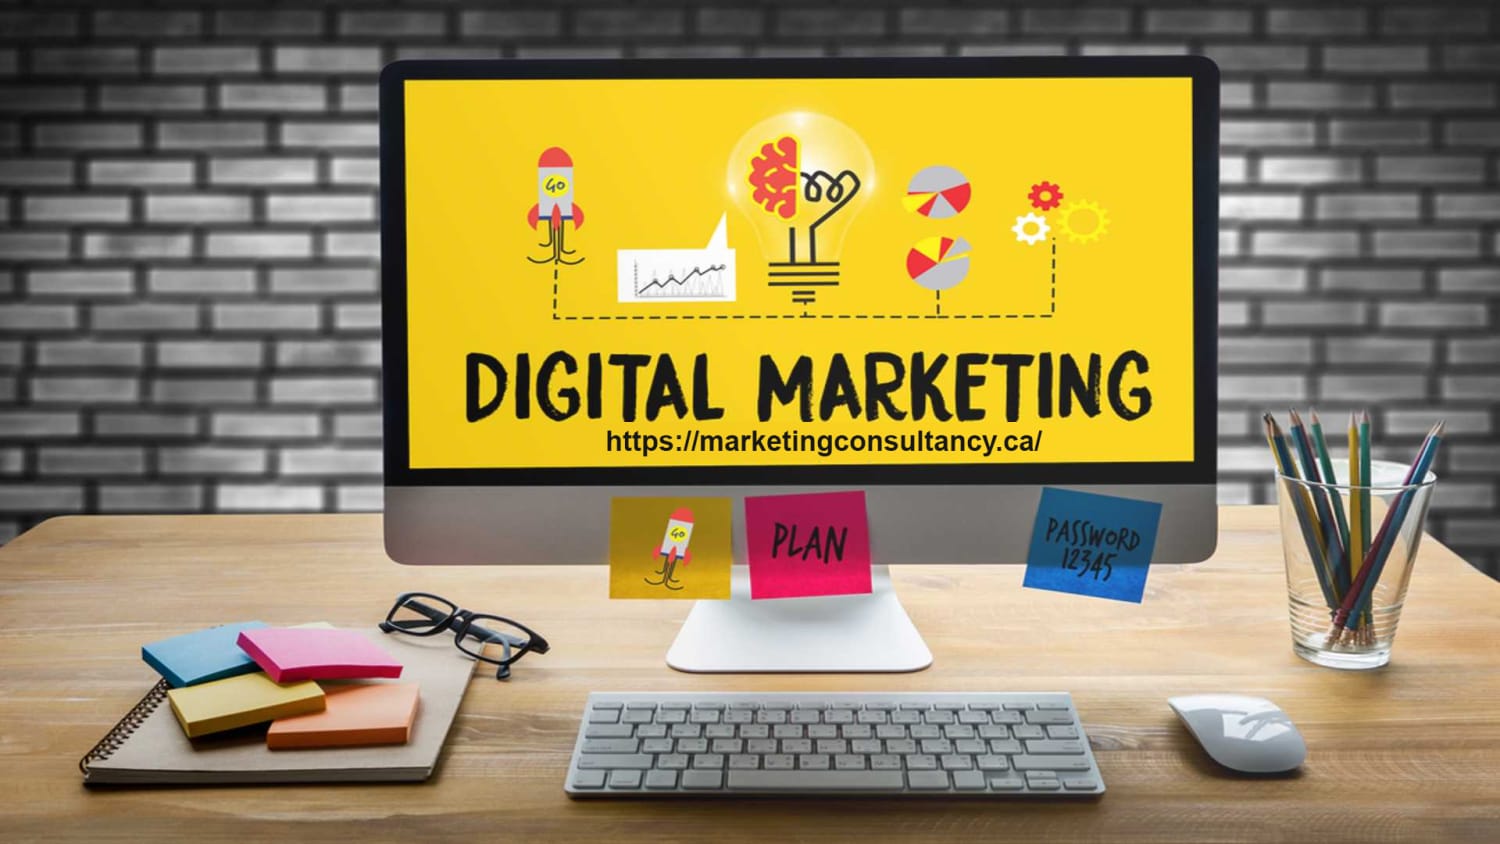 Quality Digital Marketing Services - Marketing Consultancy